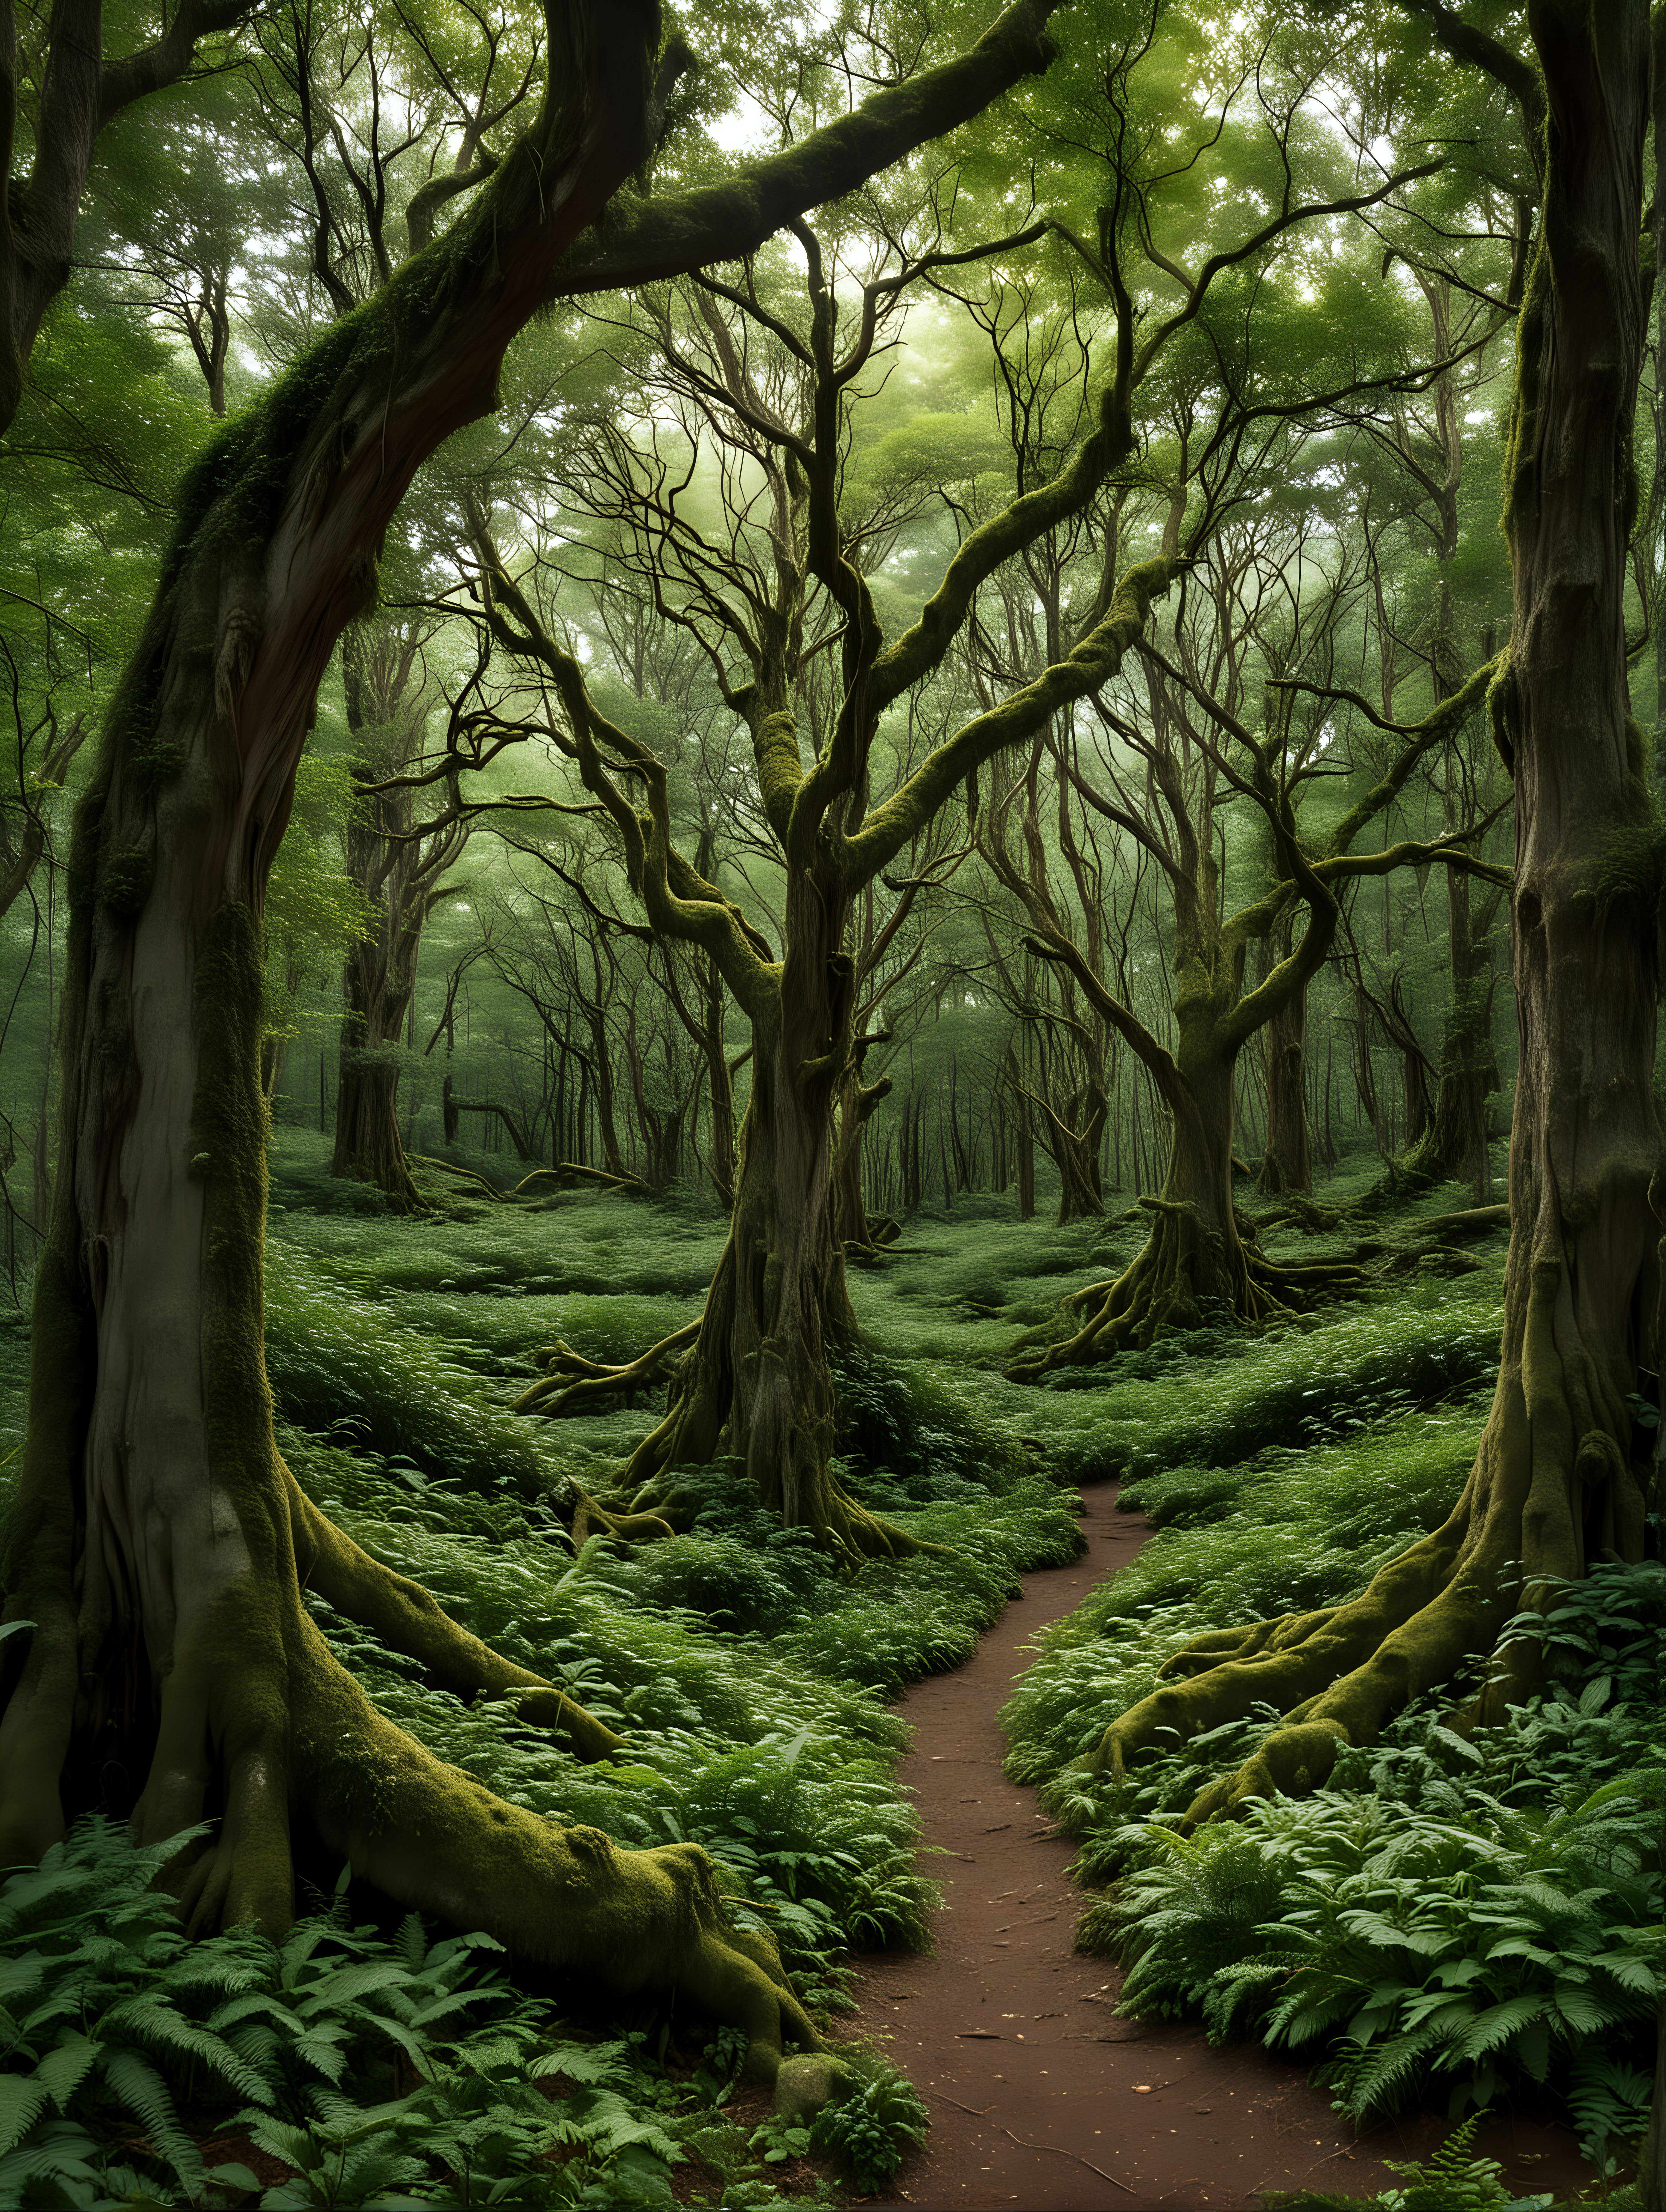 An magic forest. Huge, ancient, bent trees. Impenetrable canopy. Solid, complete groundcover.